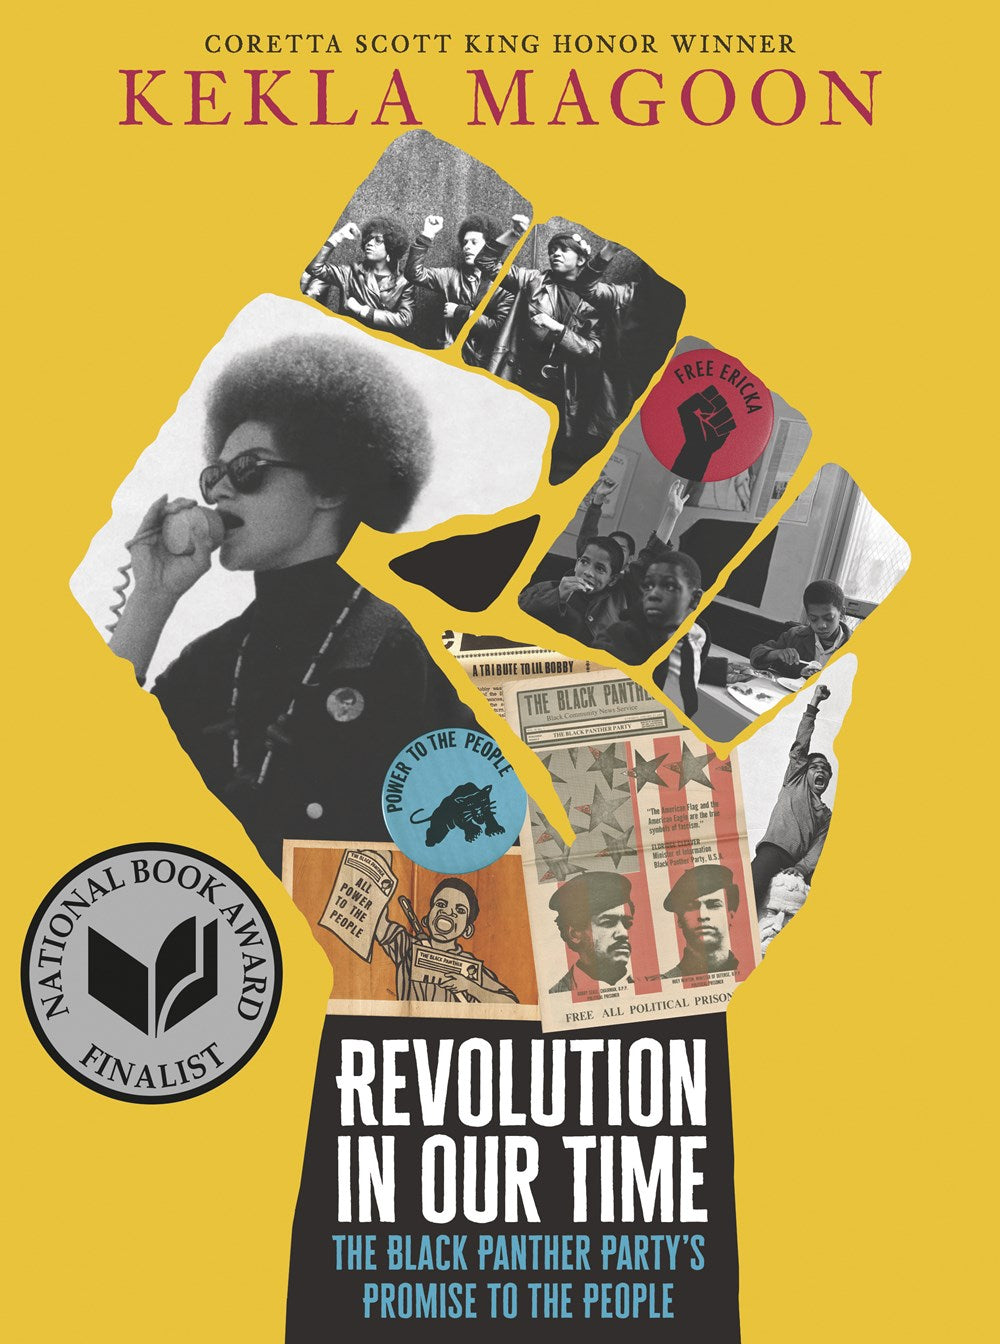 Revolution in Our Time: The Black Panther Party’s Promise to the People